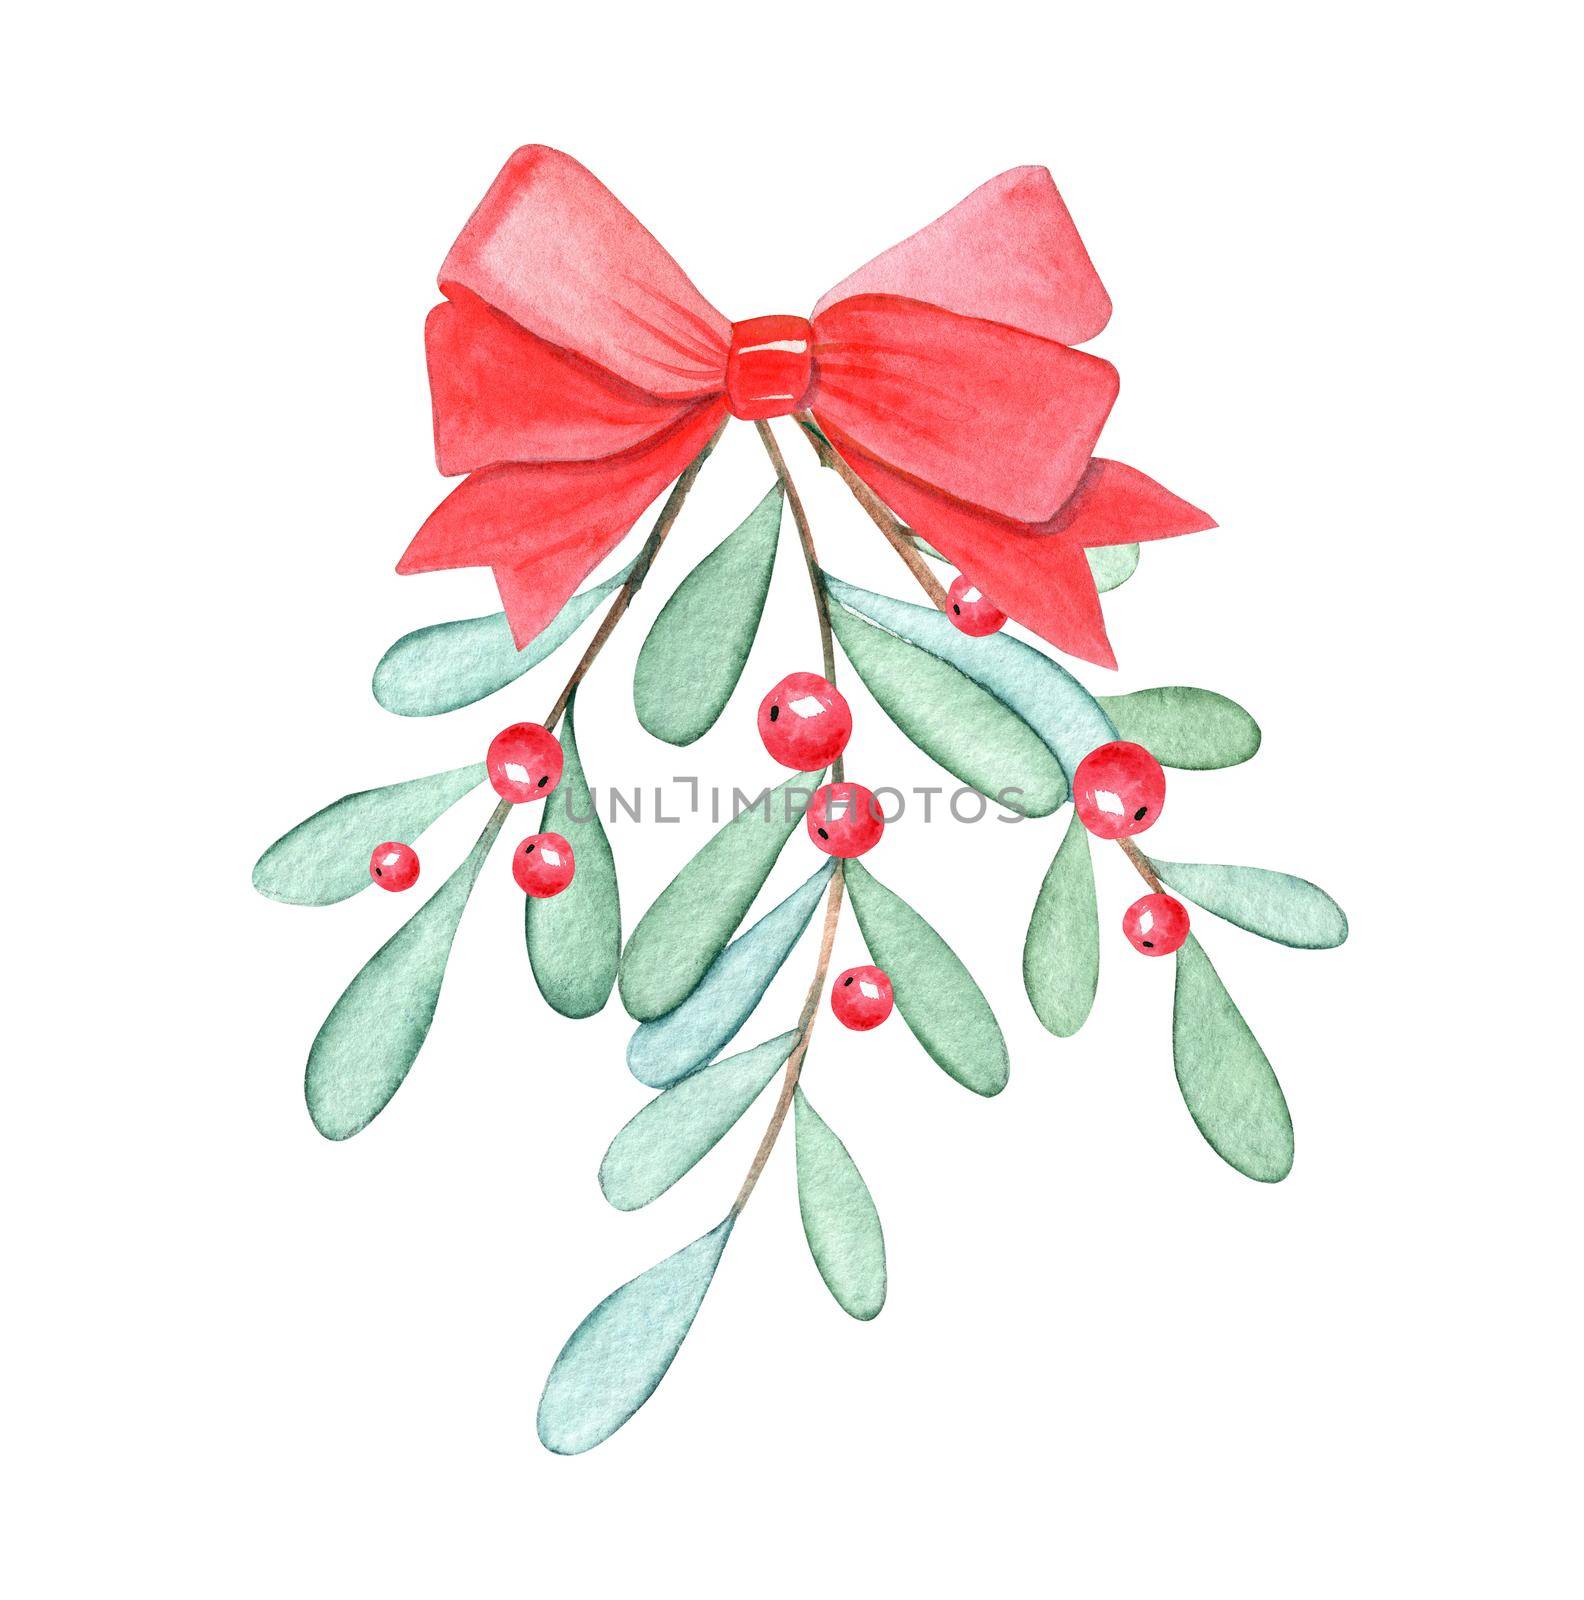 watercolor mistletoe branch with red ribbon isolated on white background